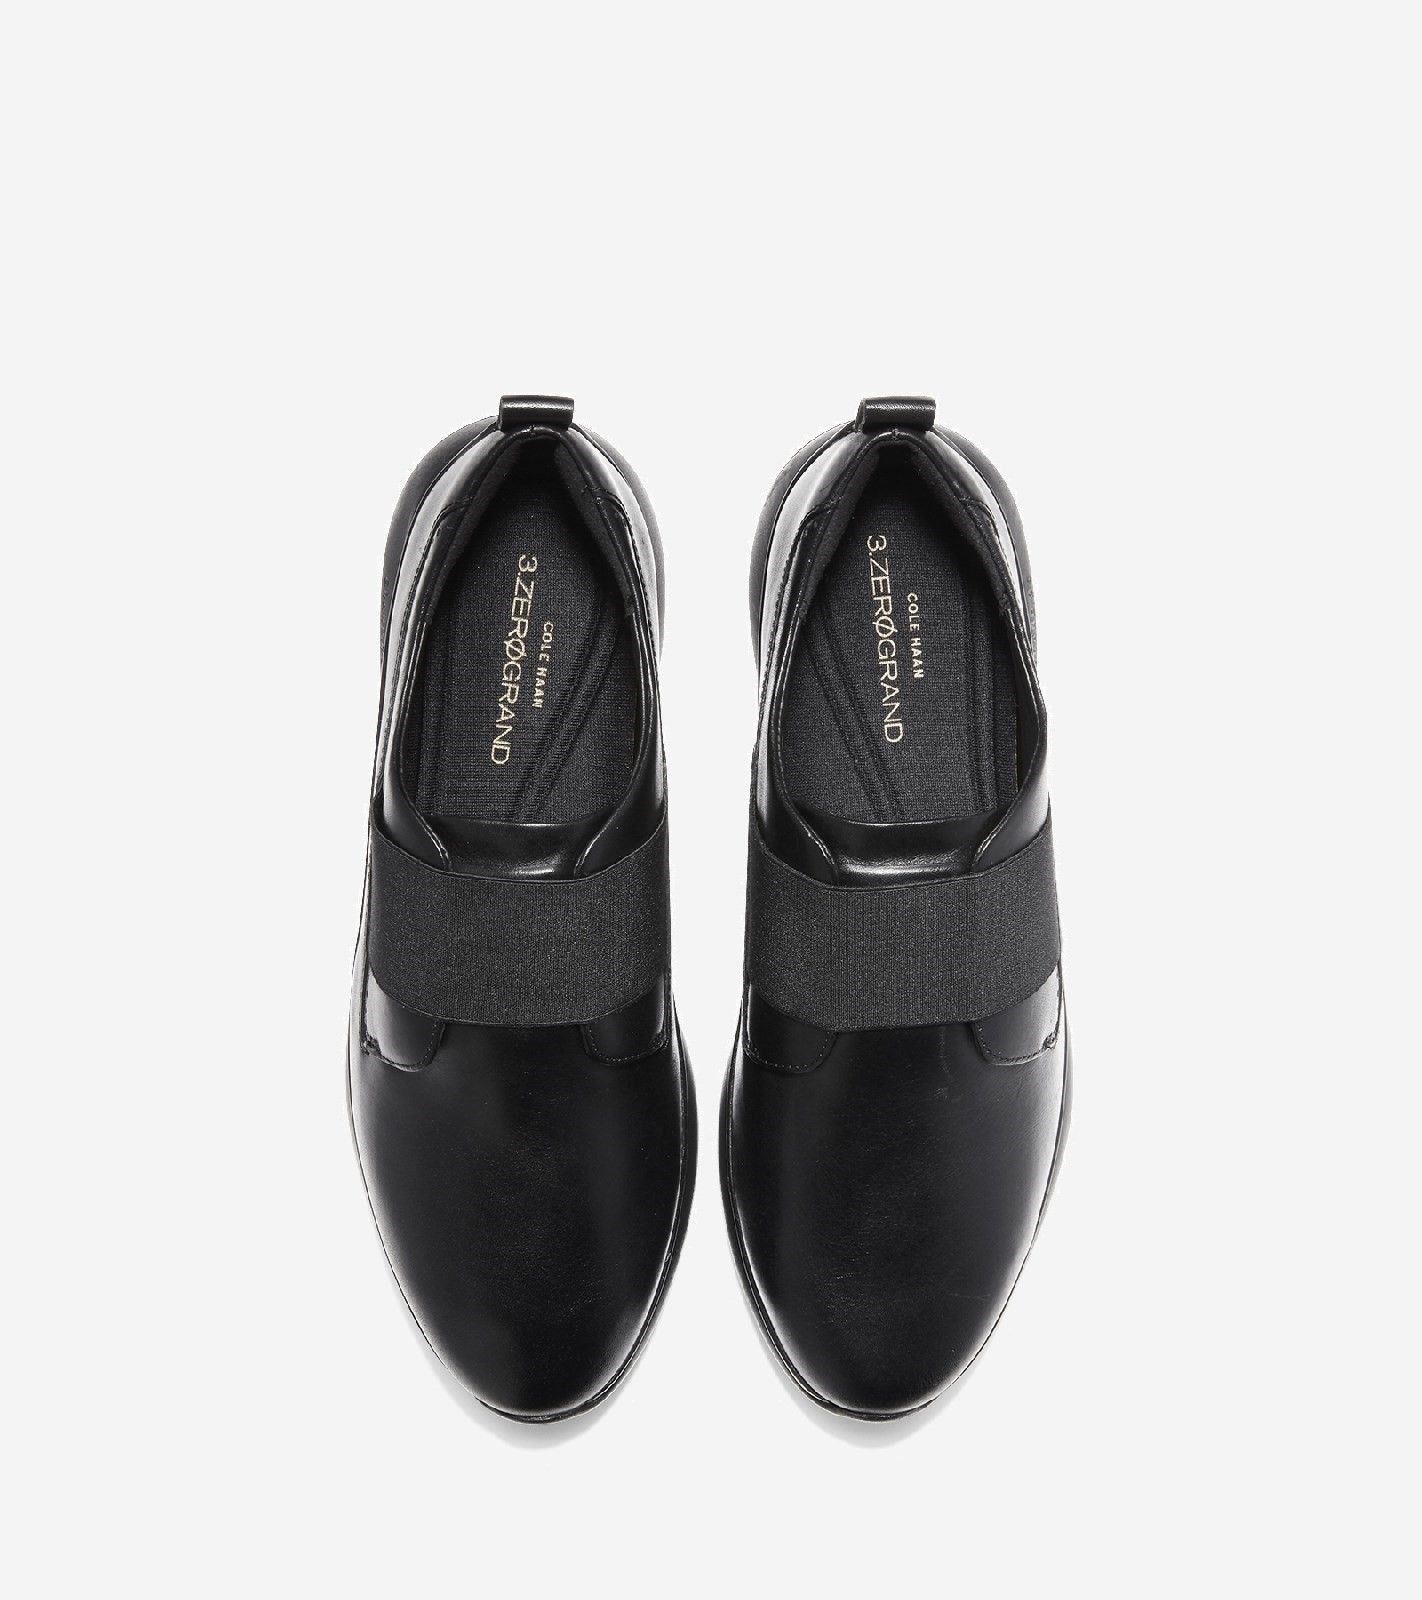 Sleek, clean and modern, the Women's 3.ZEROGRAND Oxford is designed with flexible support and serious comfort in mind. Offering an innovative and unique aesthetic, this updated oxford is styled as a slip-on for easy on/off and a custom yet secure fit Fashion oxford in smooth leather, nubuck, metallic leather or haircalf uppers with front gore detailing for easy entry.. 
Fully padded sock lining for ultimate comfort.. 
Full rubber outsole with concealed Grand OS technology.. 
All-new Fit Chassis support system runs from the forefoot to the heel and provides support, rigidity and flexibility in the areas where your foot needs it the most..